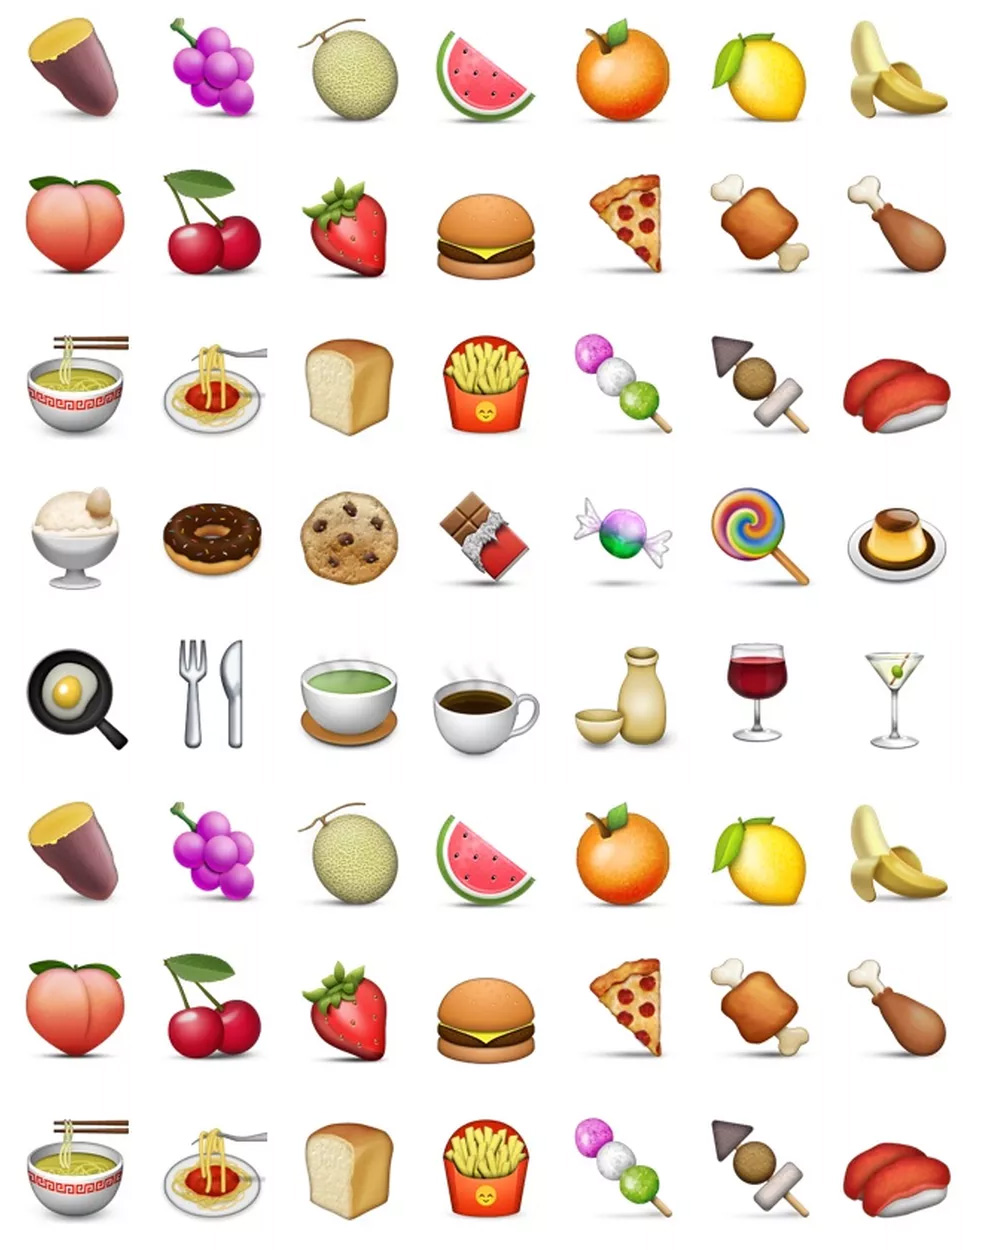 This cool restaurant lets you order dinner with emojis 